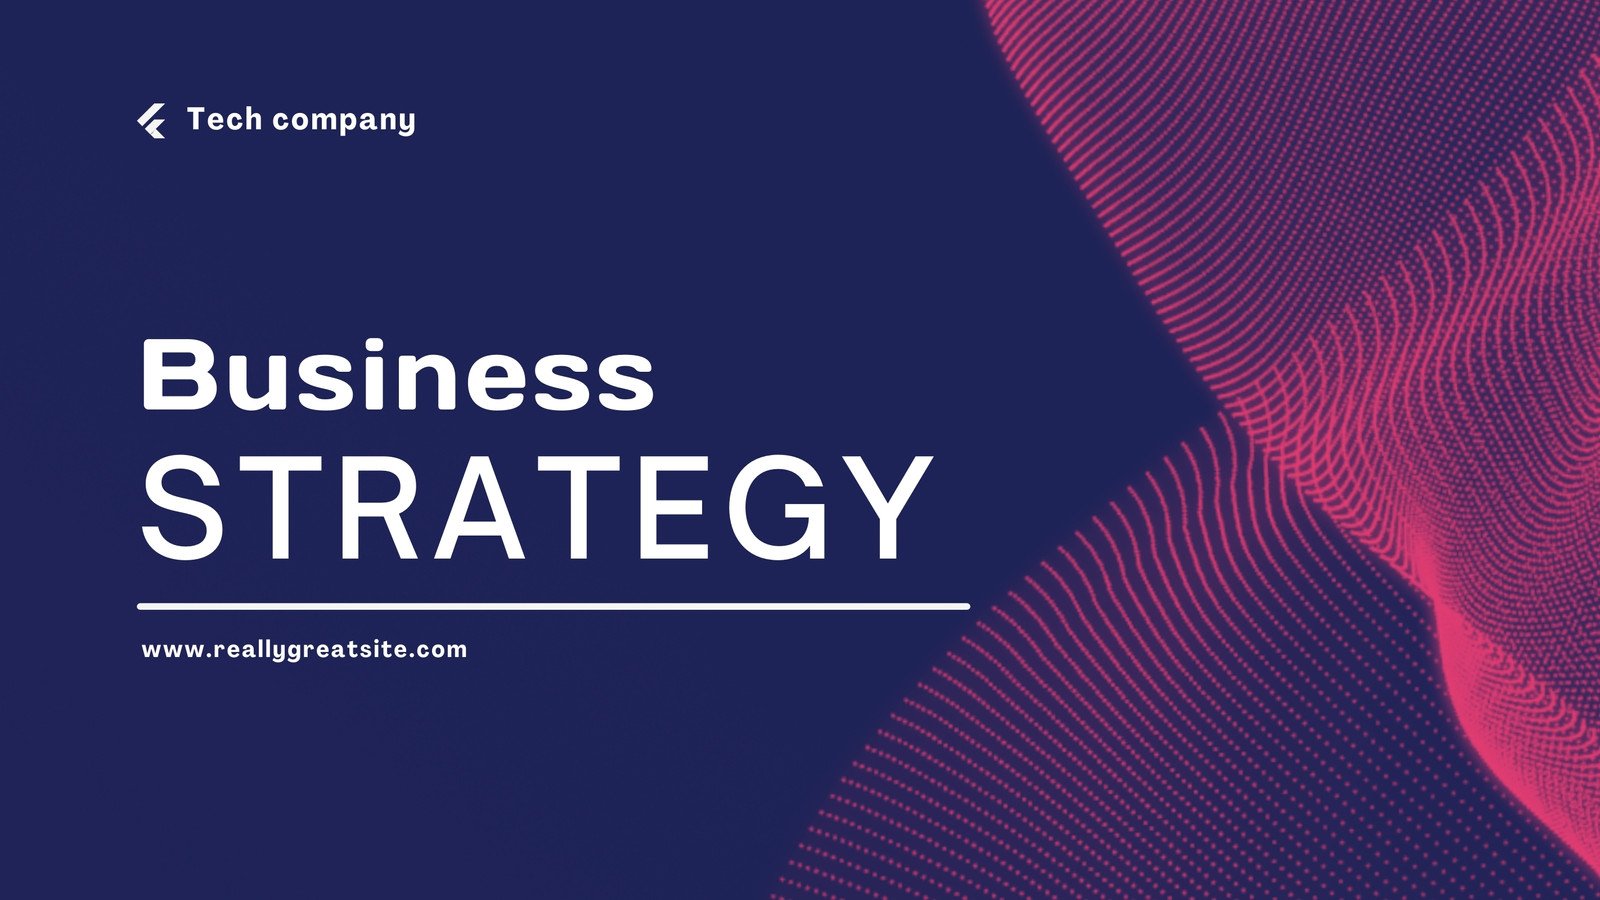 Blue and Pink Professional Business Strategy Presentation